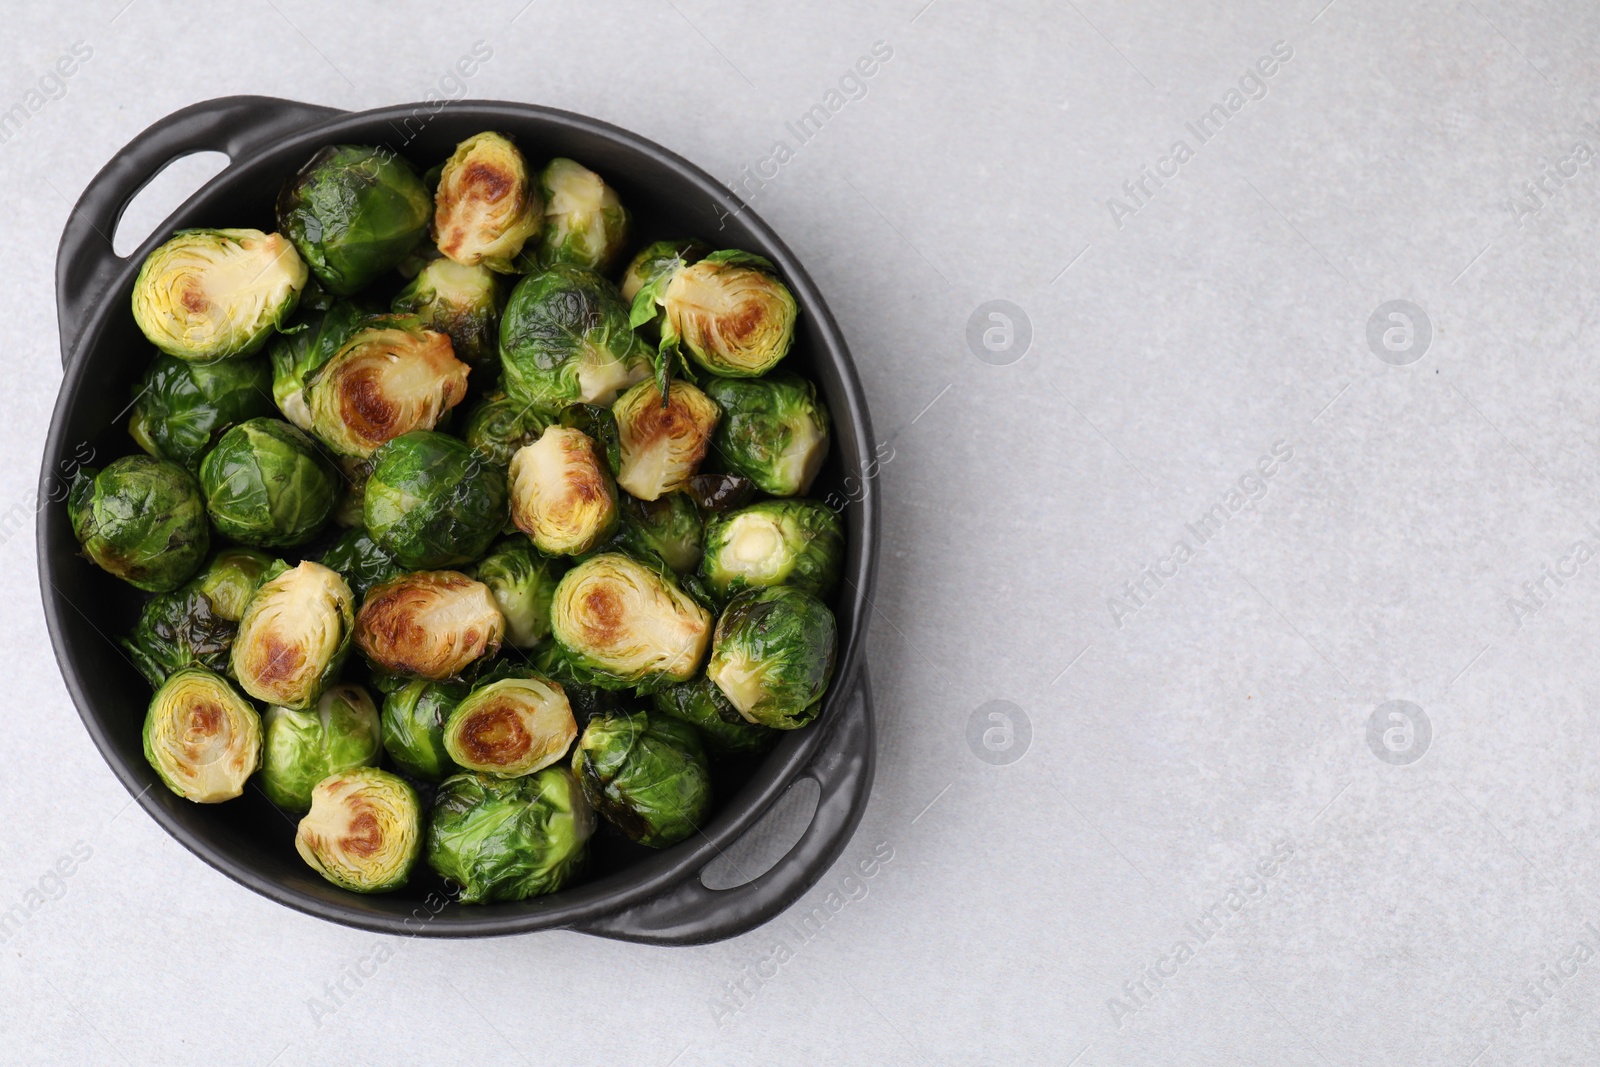 Photo of Delicious roasted Brussels sprouts in baking dish on light table, top view. Space for text